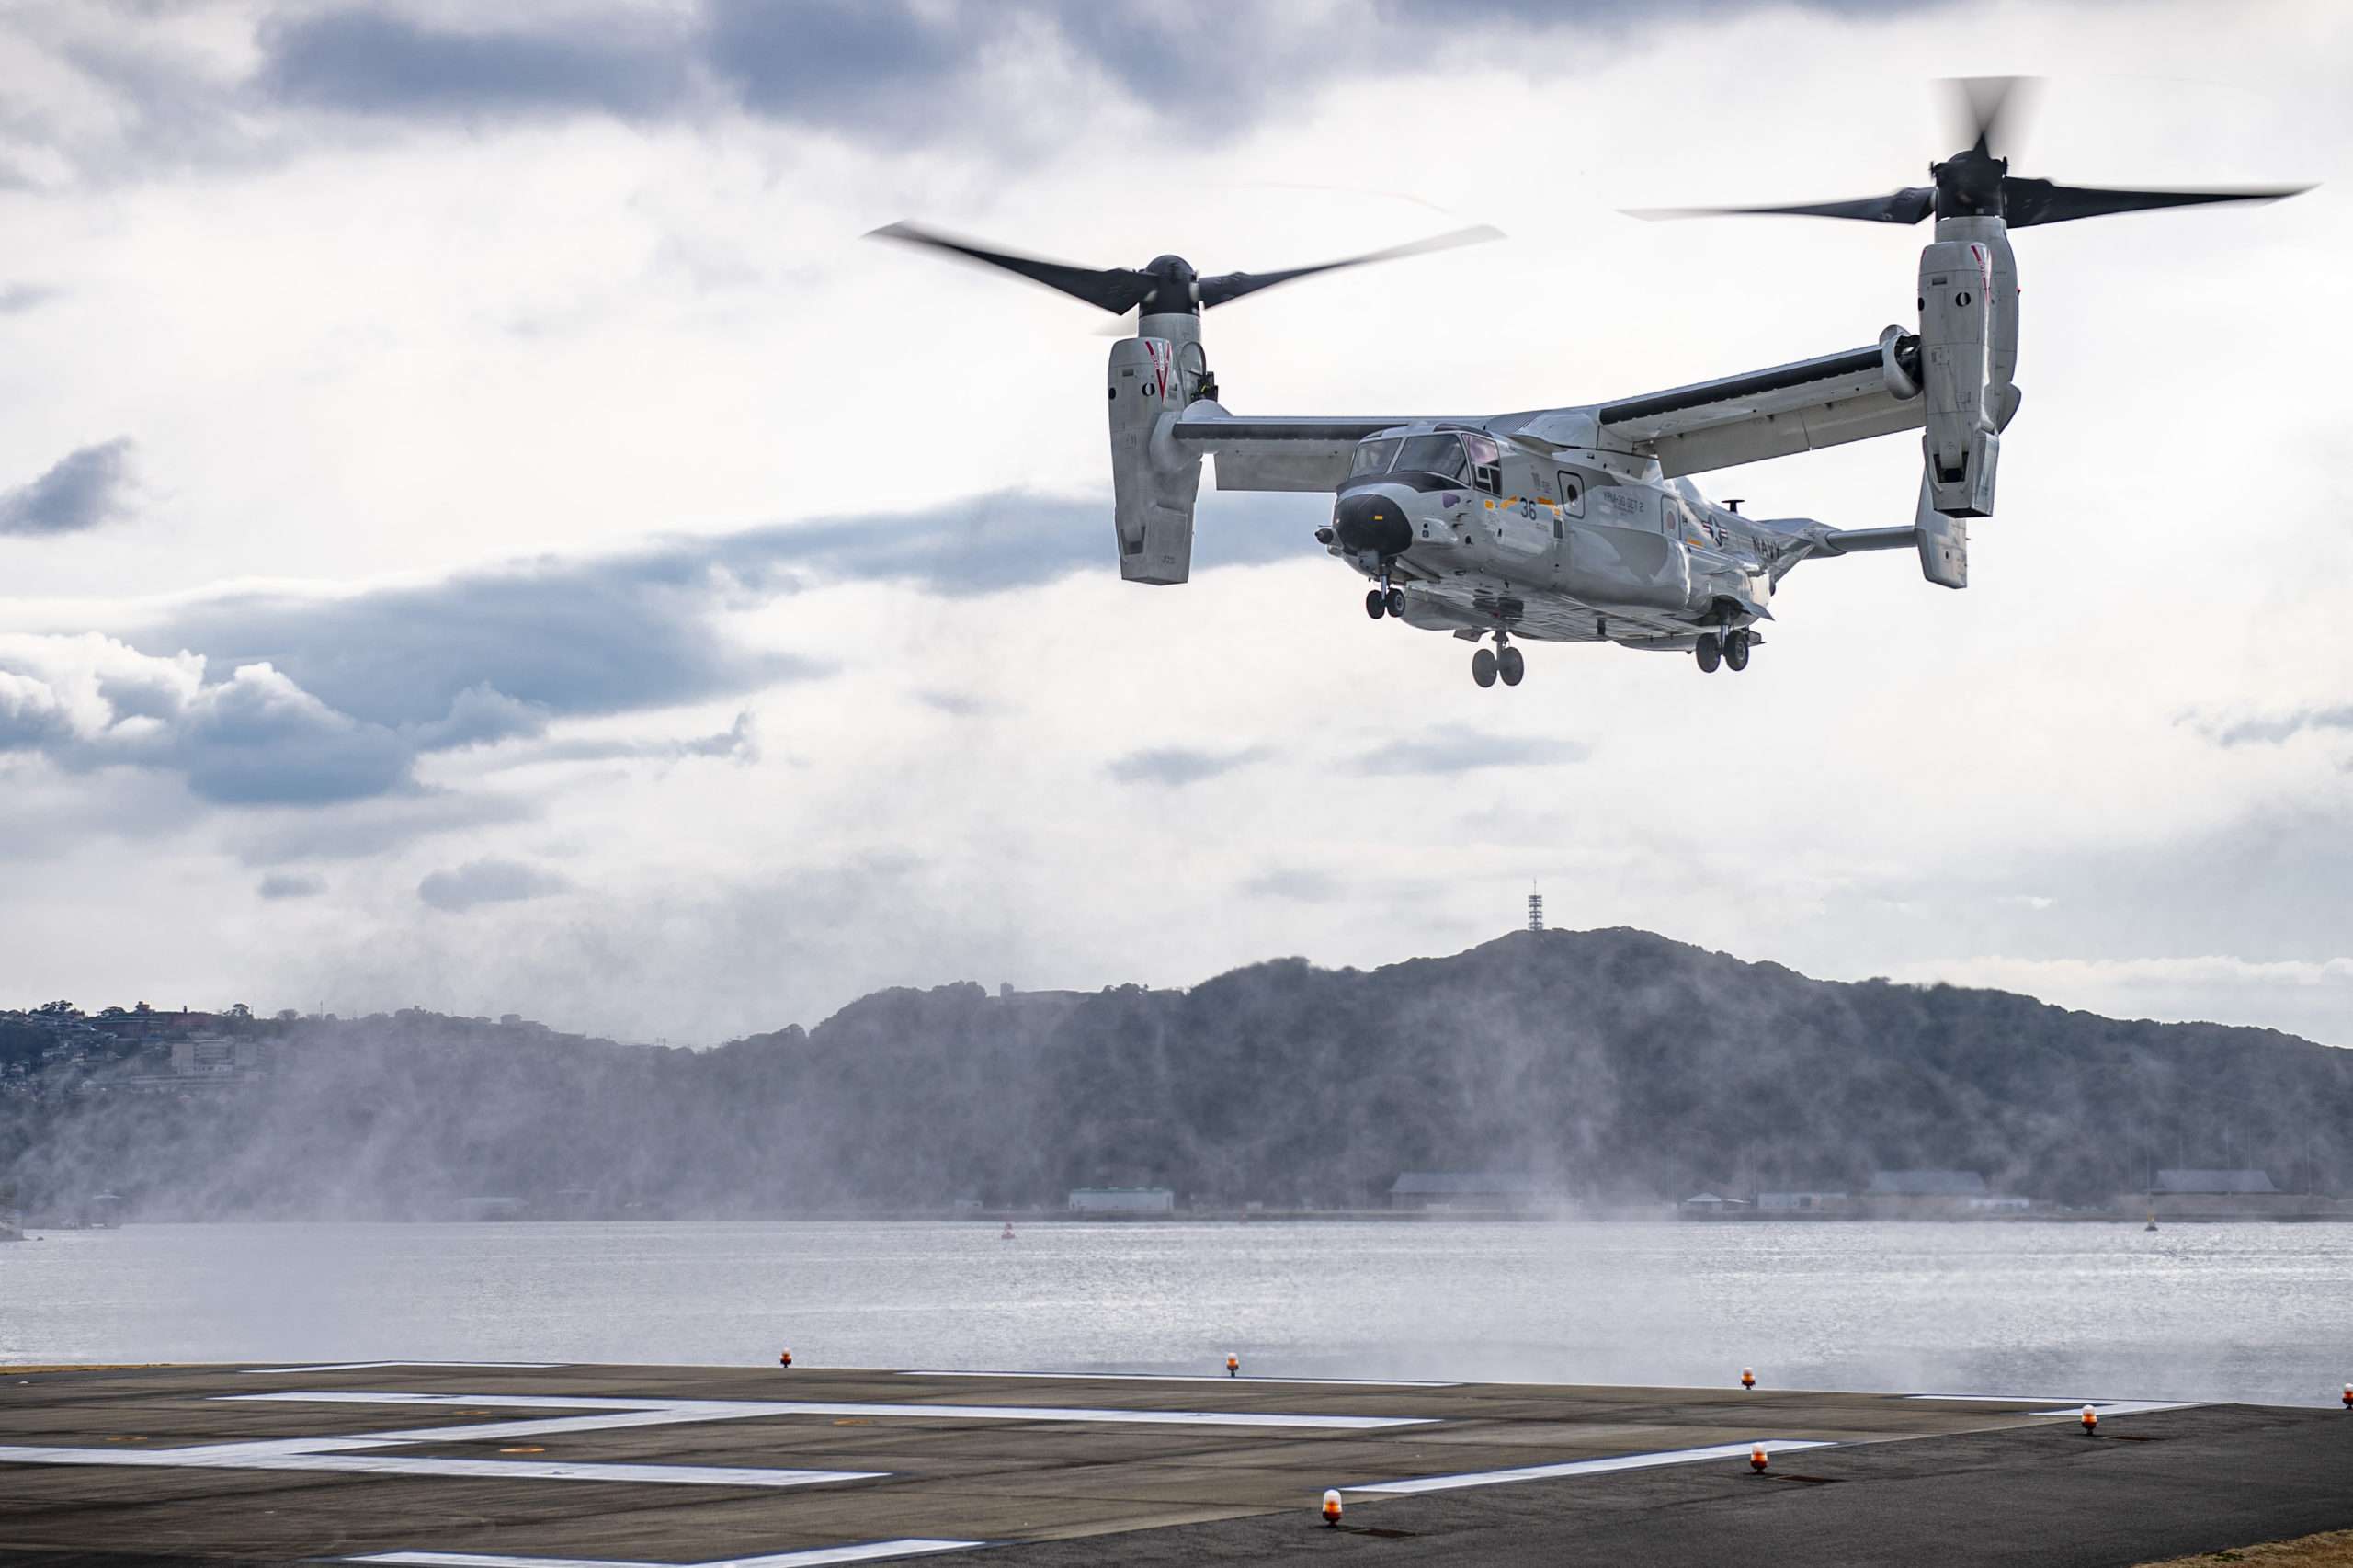 A V-22 Osprey helicopter comes in to land.